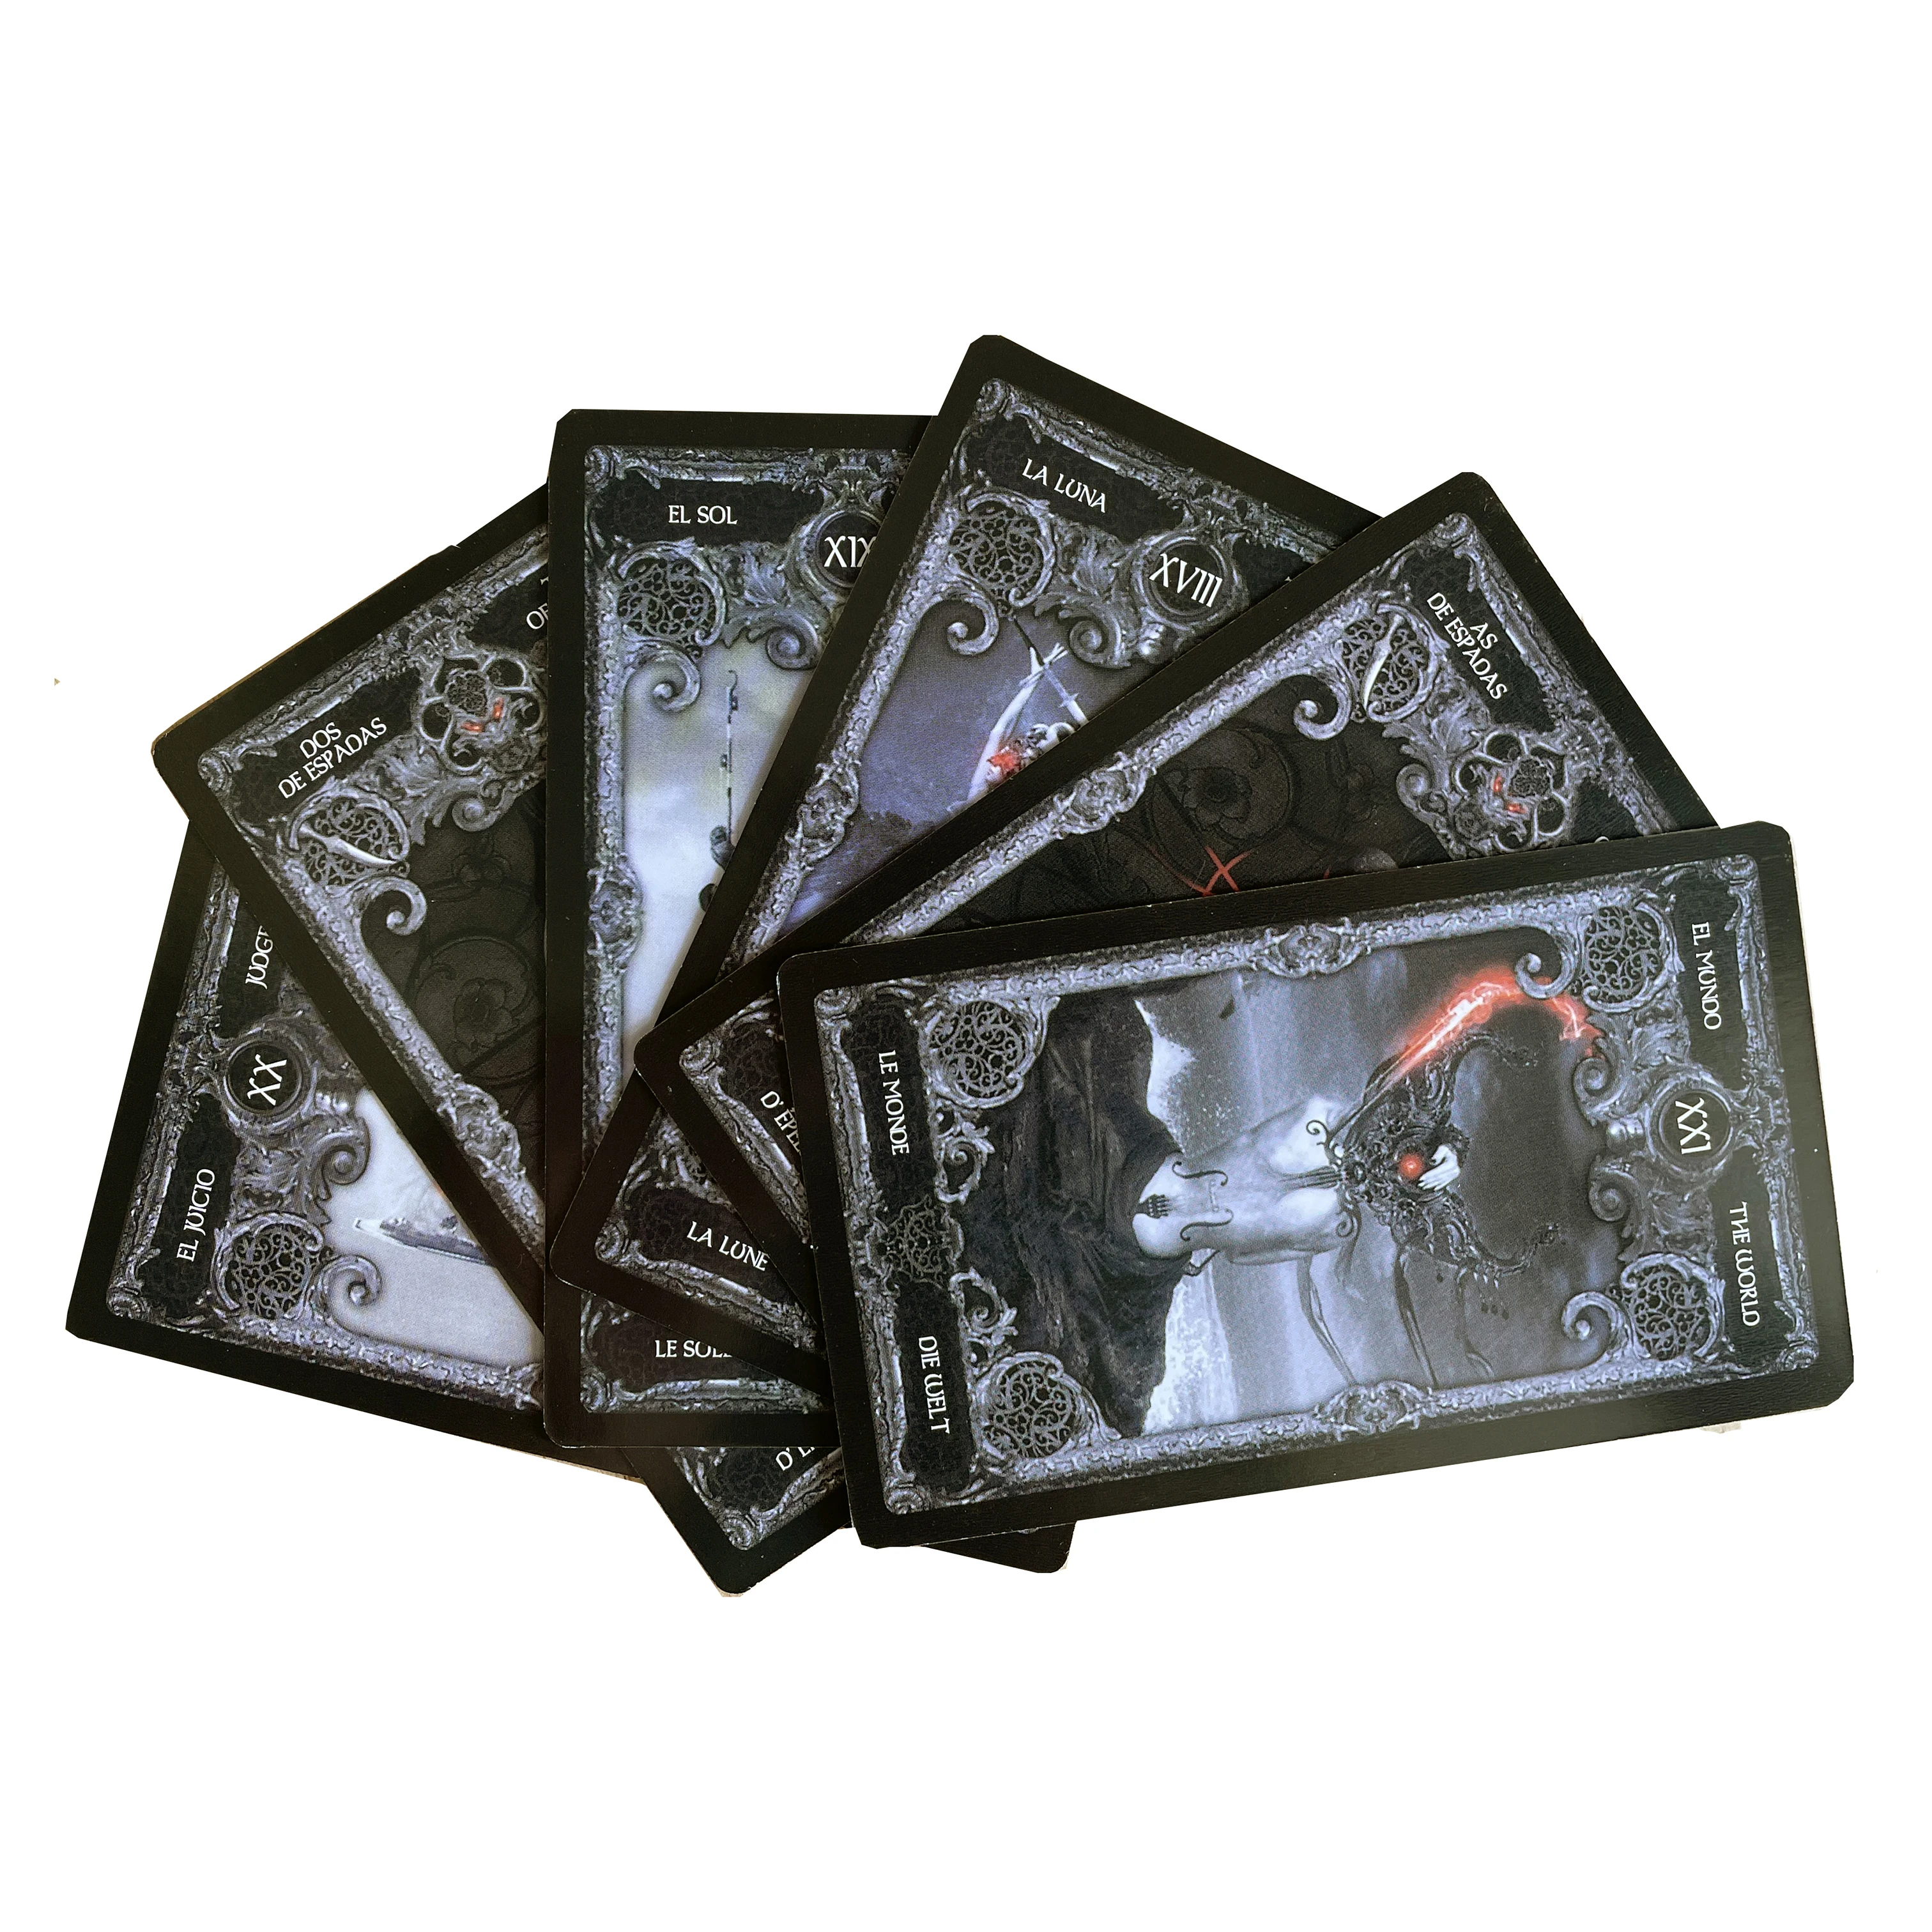 Dark tarot card deck for beginners , Unique tarot cards deck with guidebook , Full tarot decks 78 cards ,Beautiful oracle cards short stories in turkish for beginners